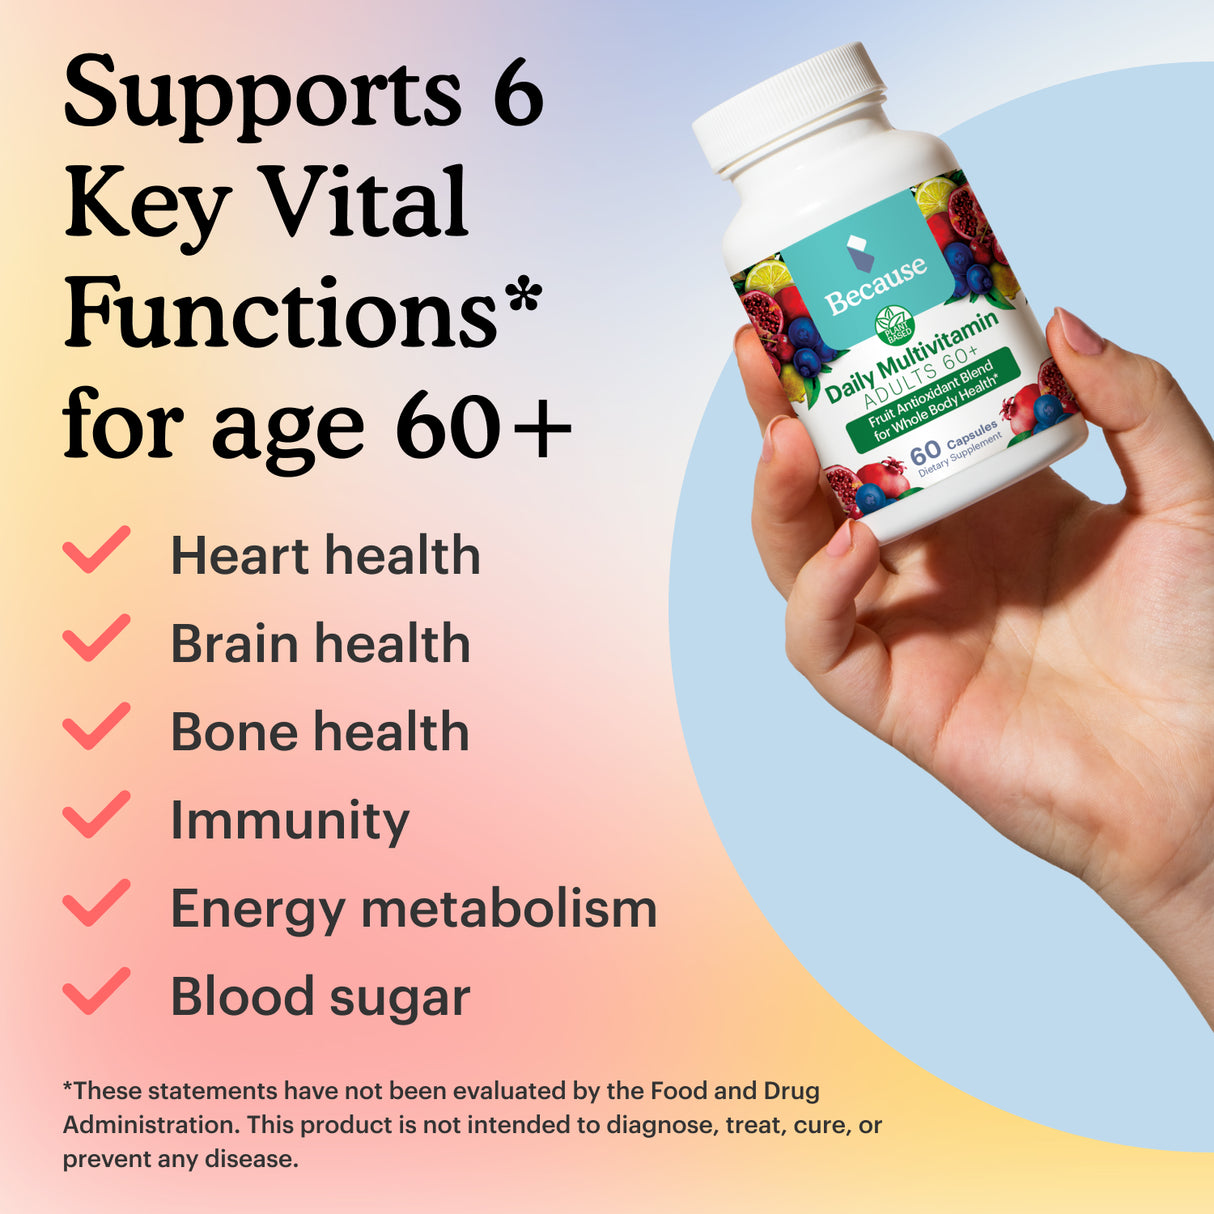 List of 6 key vital functions for age 60+ that the Daily multivitamin supports